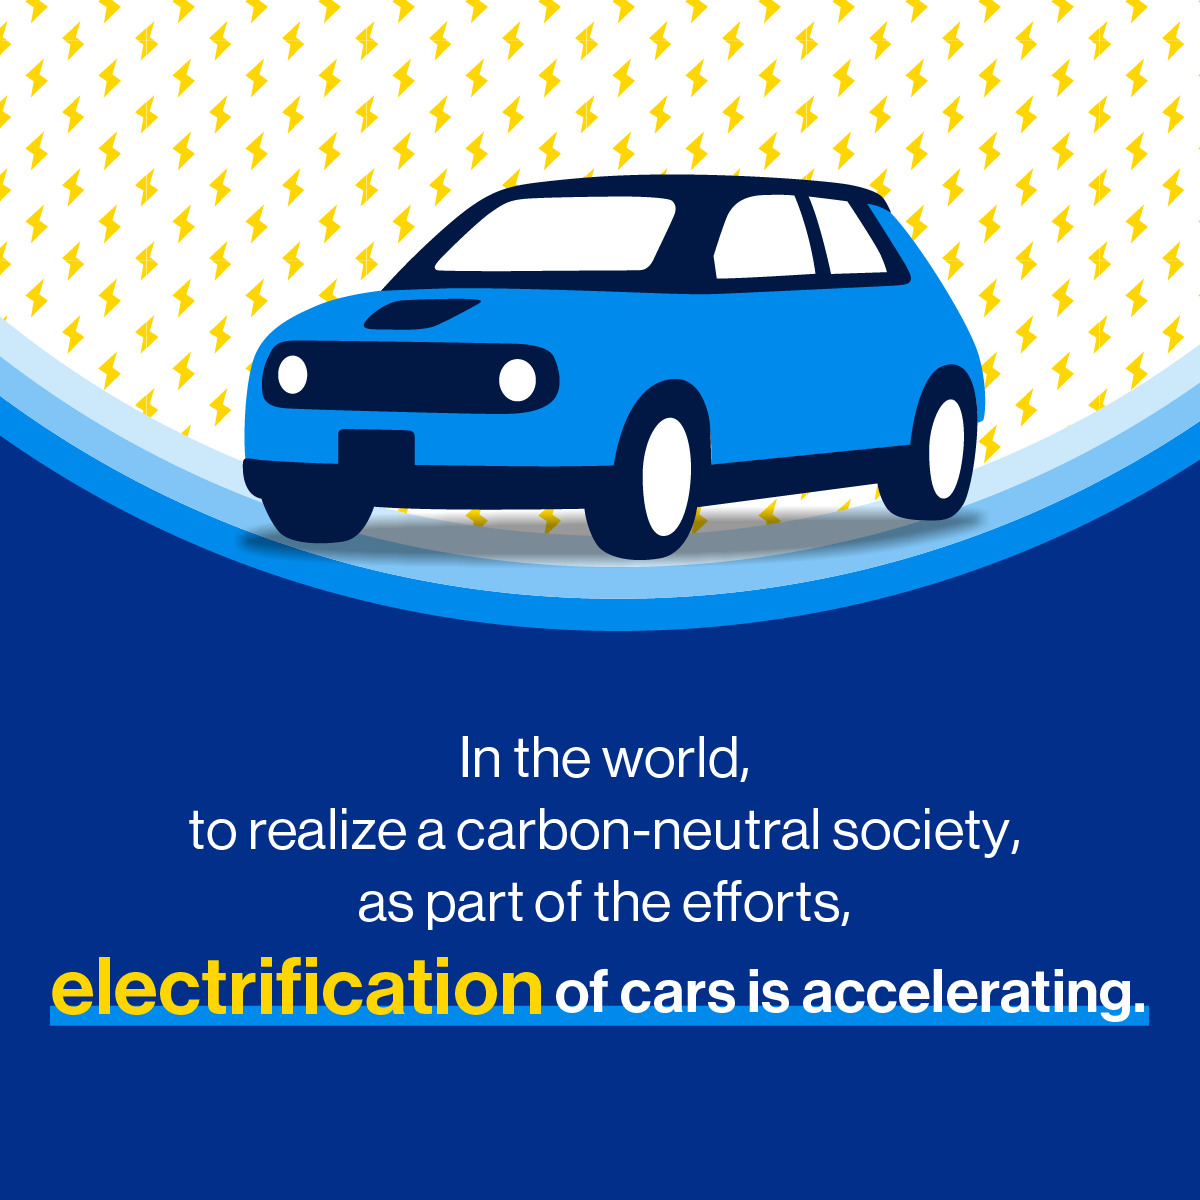 In the world, electrification of cars is accelerating